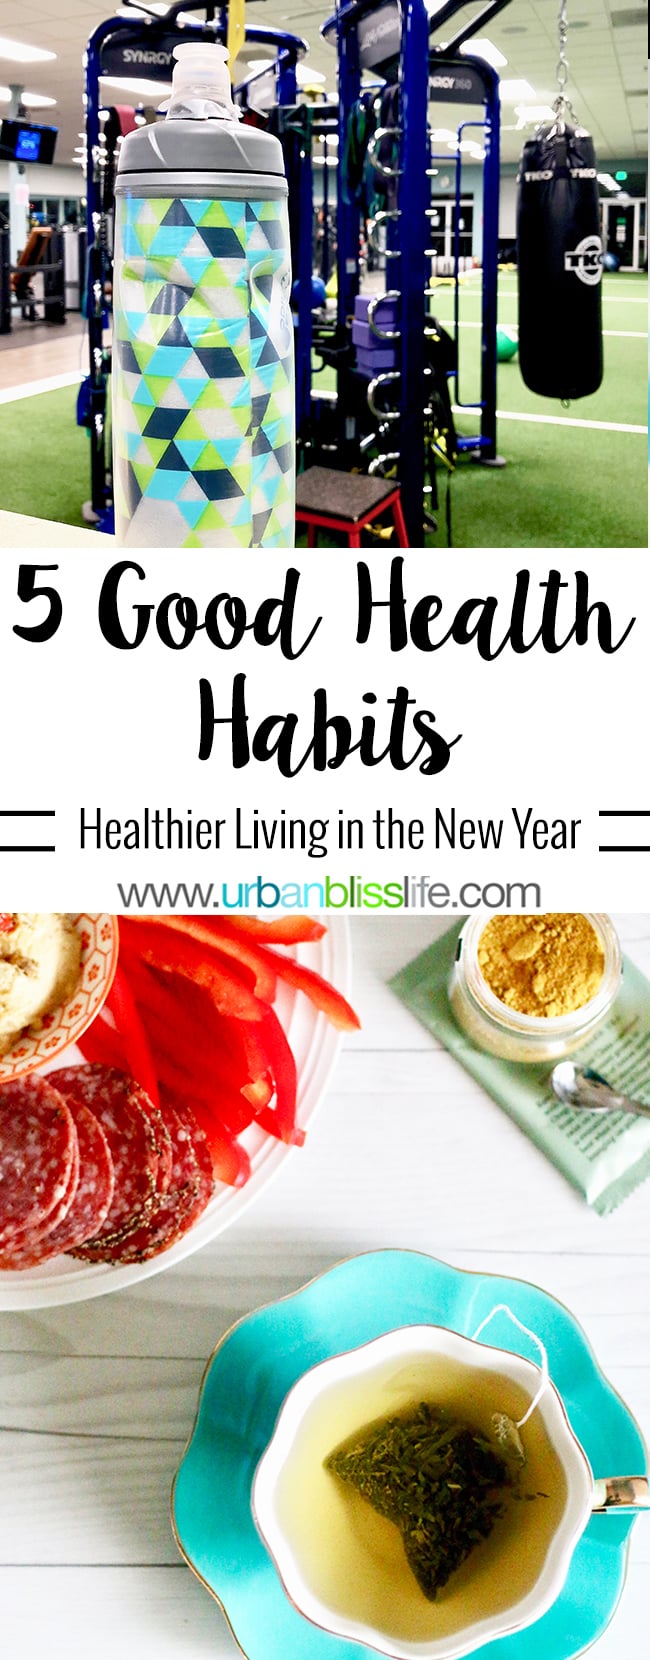 Good Health Habits to start in the new year, on UrbanBlissLife.com